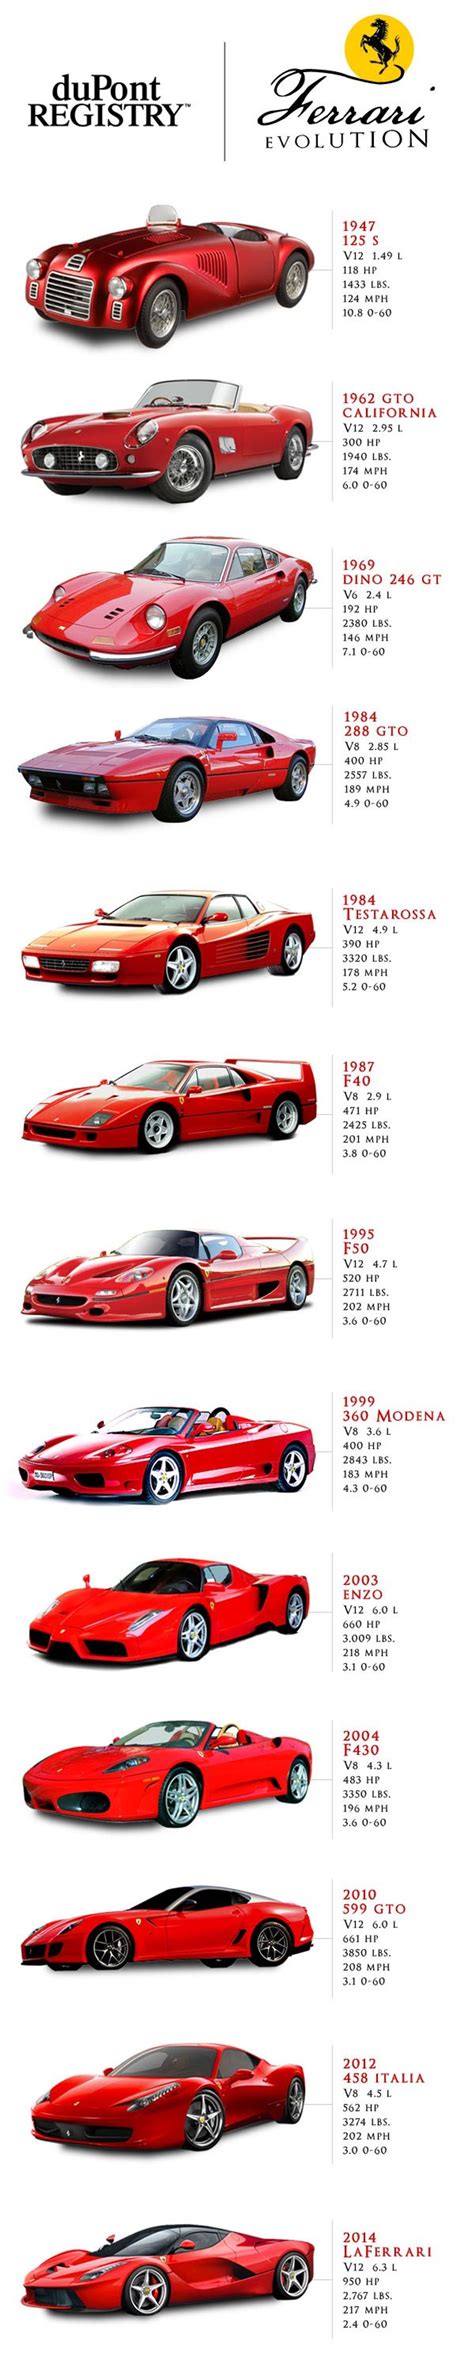 The Evolution Of Ferrari From 1947 To Now